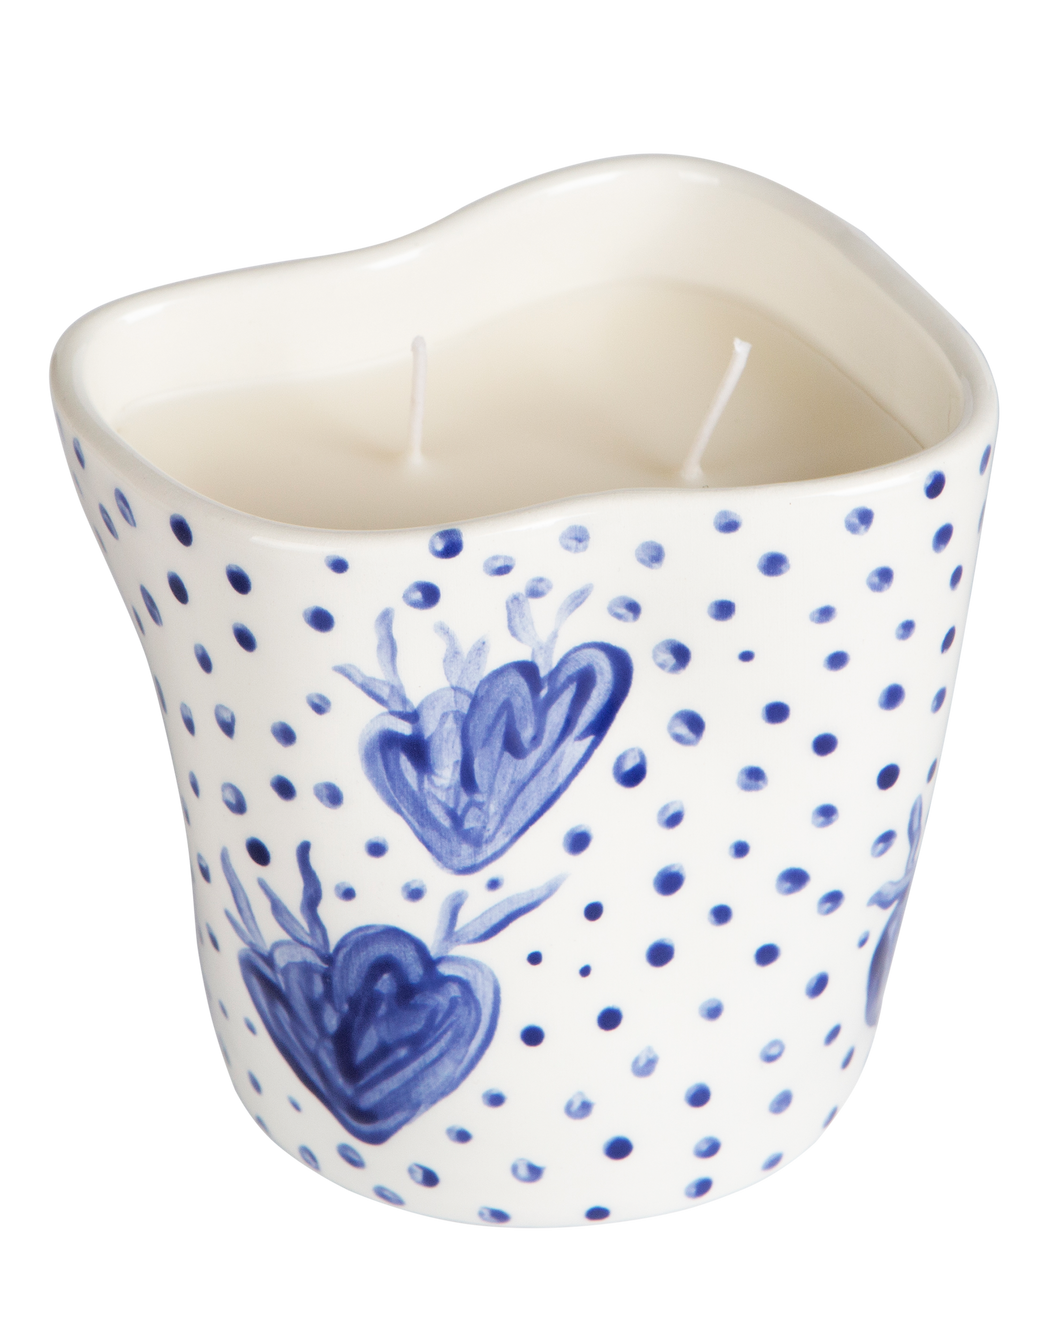 BLUE CORAL & DOTS CANDLE